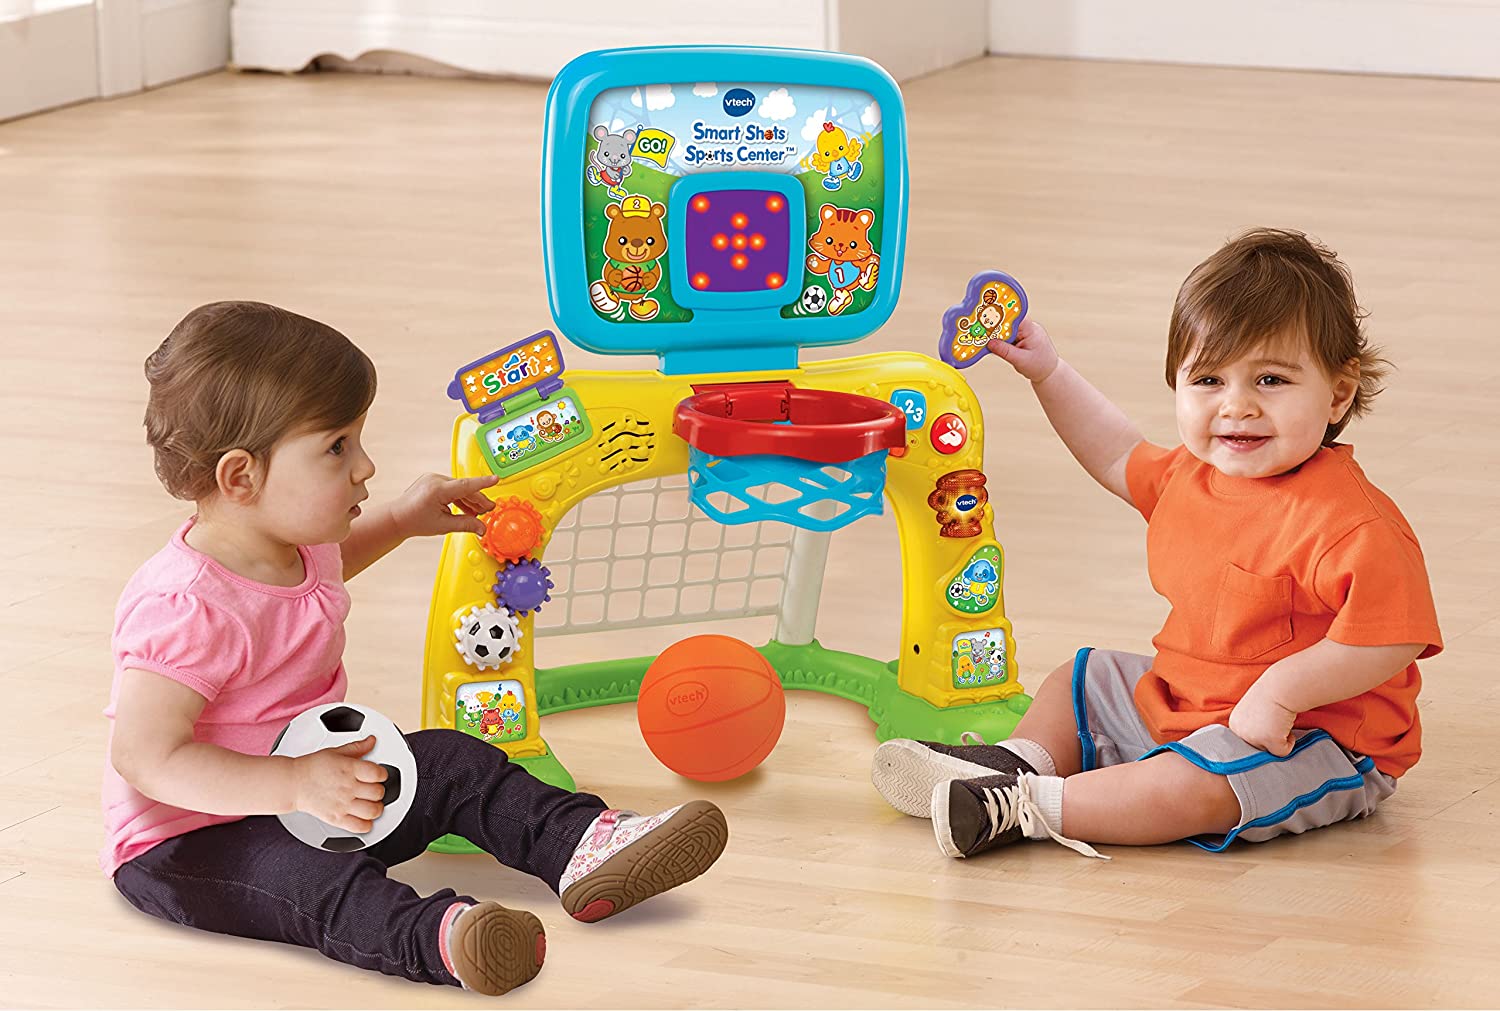 VTech Smart Shots Sports Center, Yellow - Learn About Shapes, Numbers and More